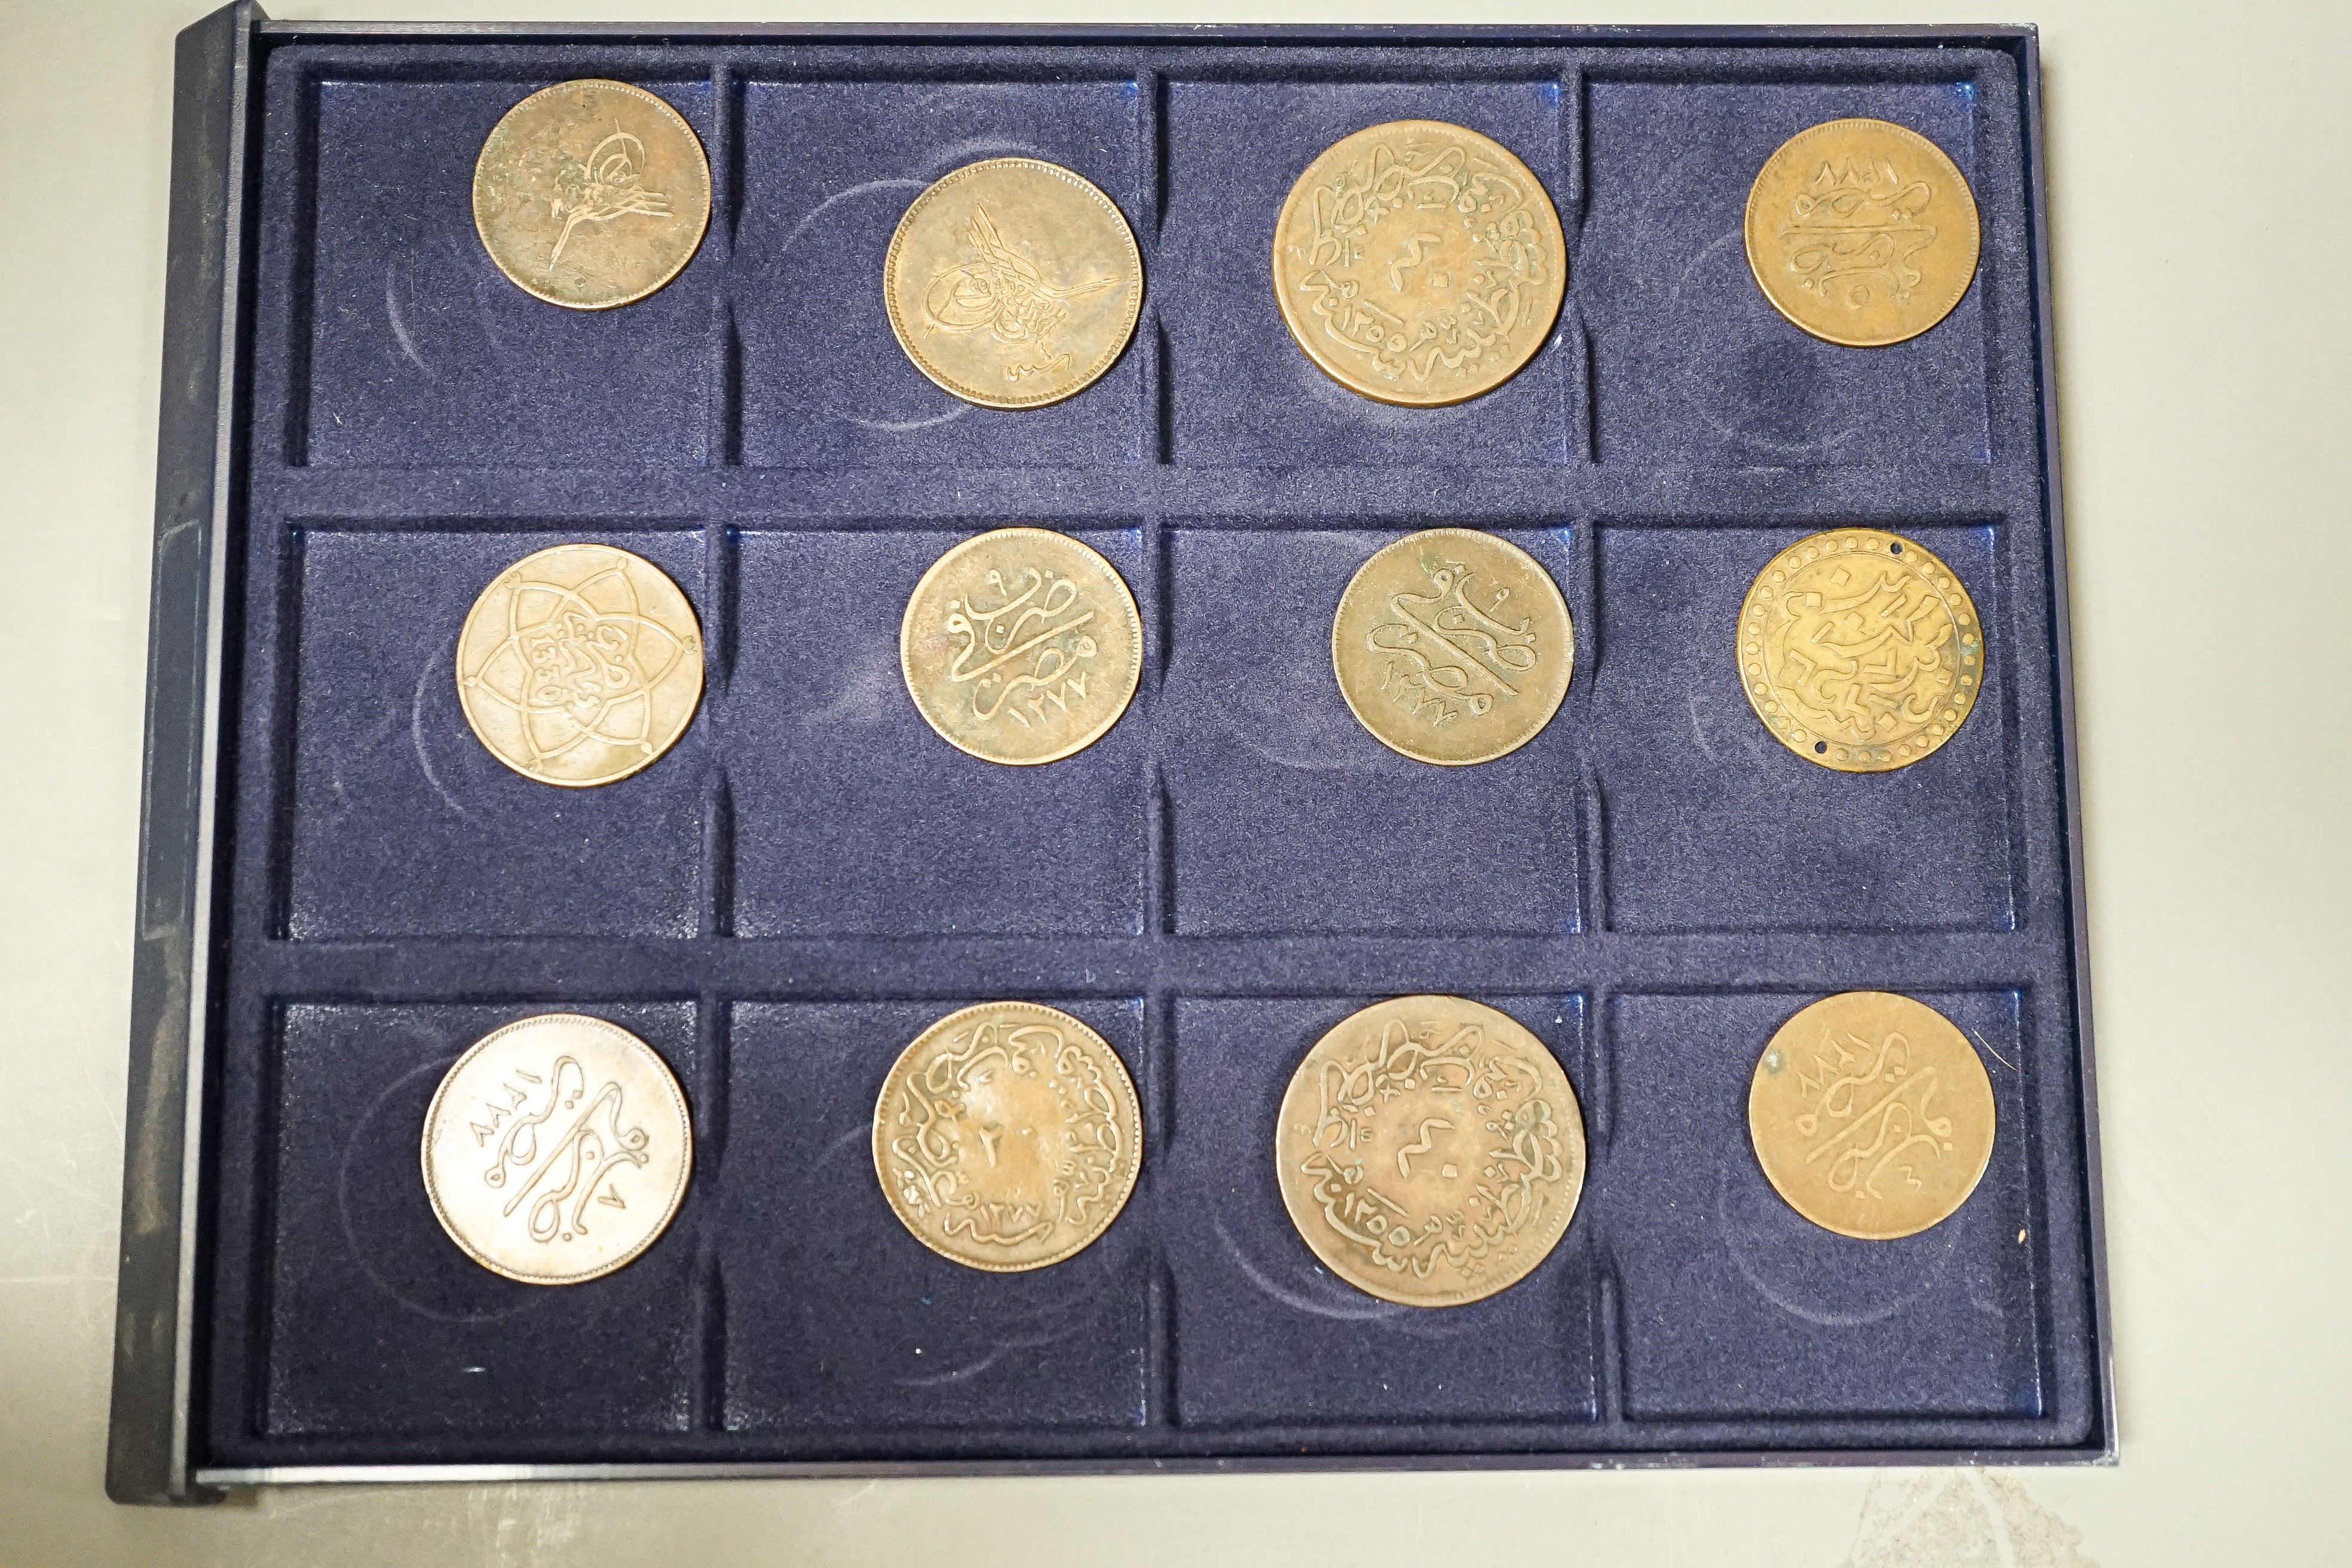 Ottoman Empire and Islamic coins, 19th/20th century, silver and bronze coinage, 12 trays - Image 10 of 13